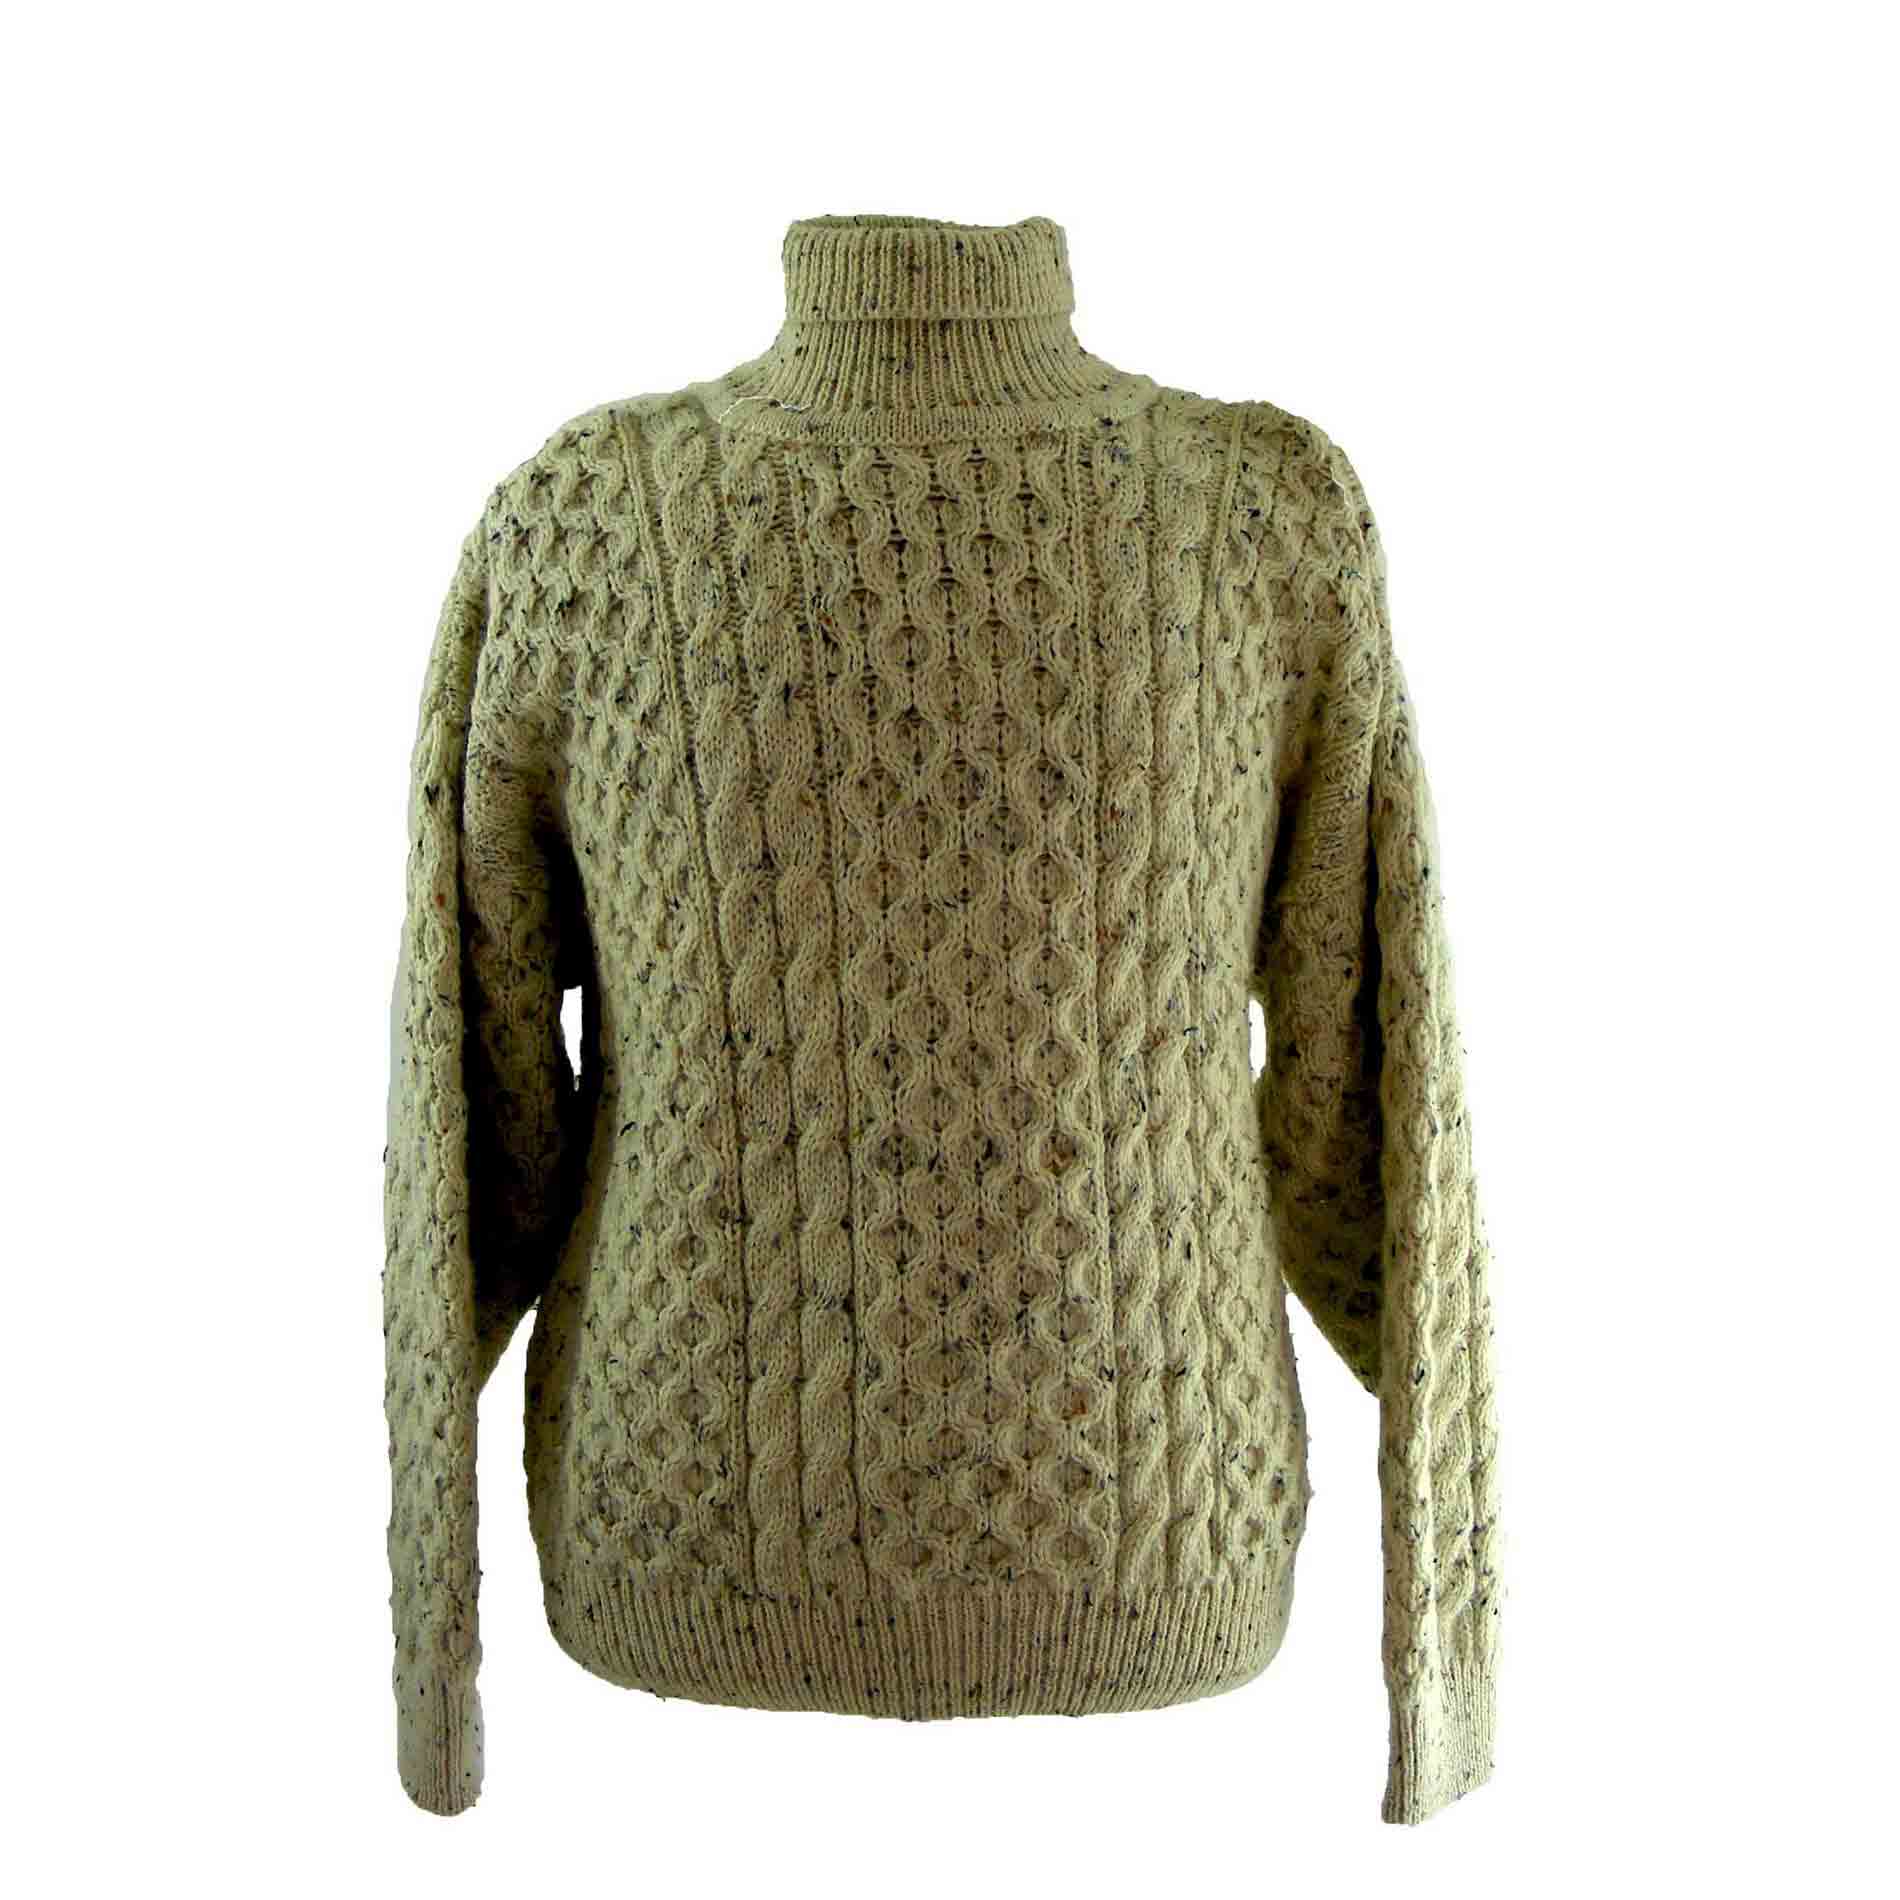 Cable knit roll neck sweater - Blue 17 Vintage Clothing